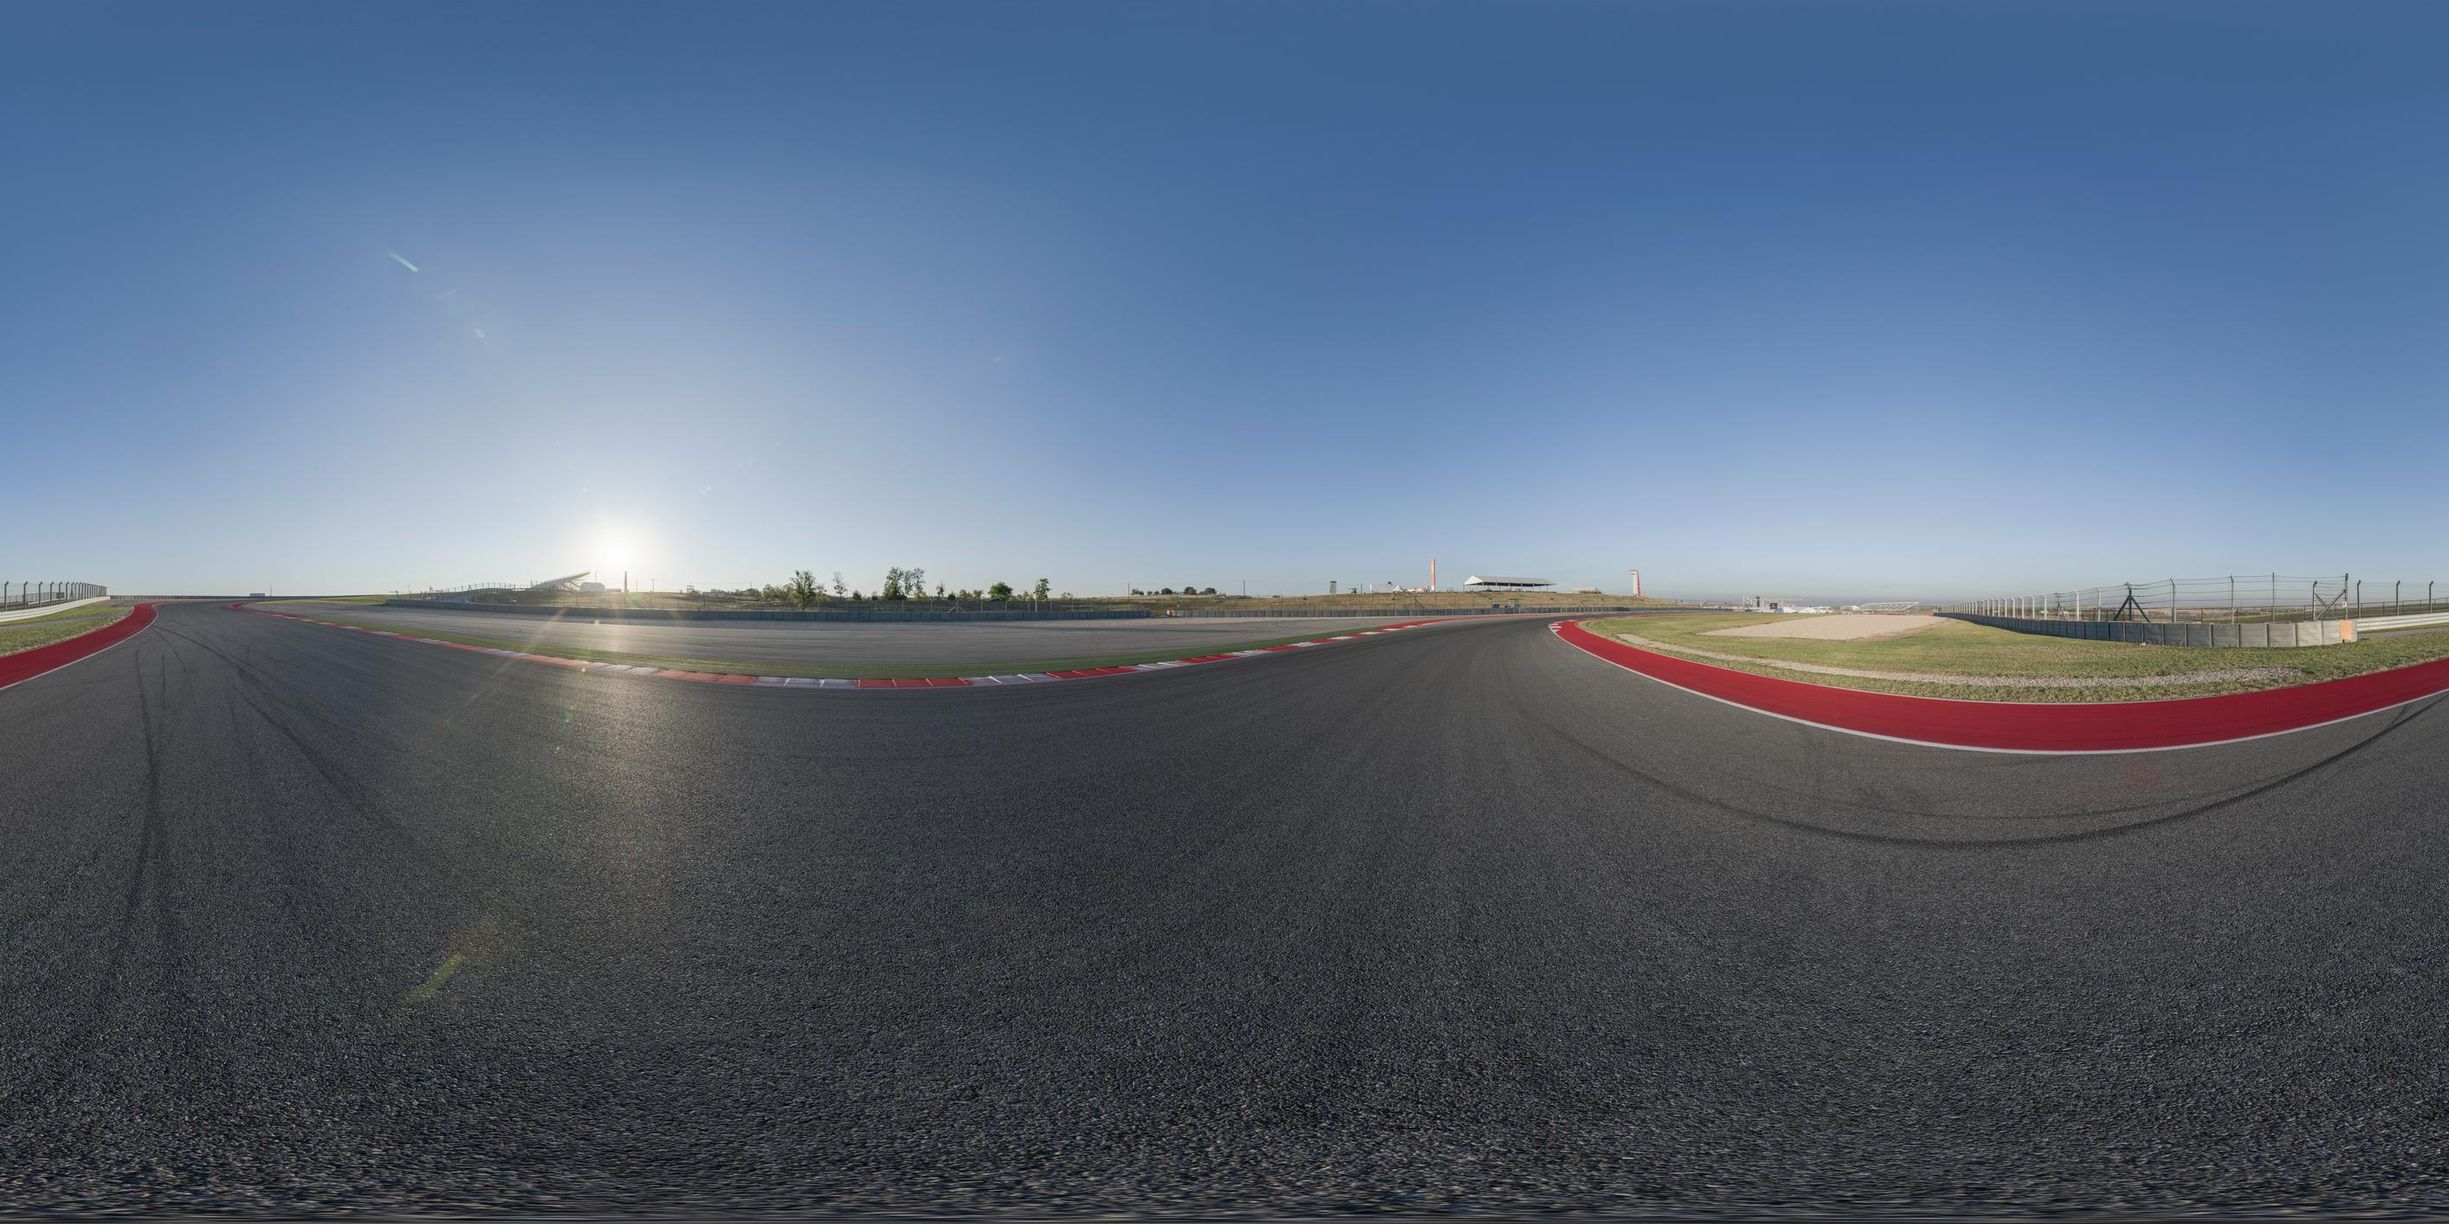 the sun is setting on a track with an asphalt course in front of it and red and green markings